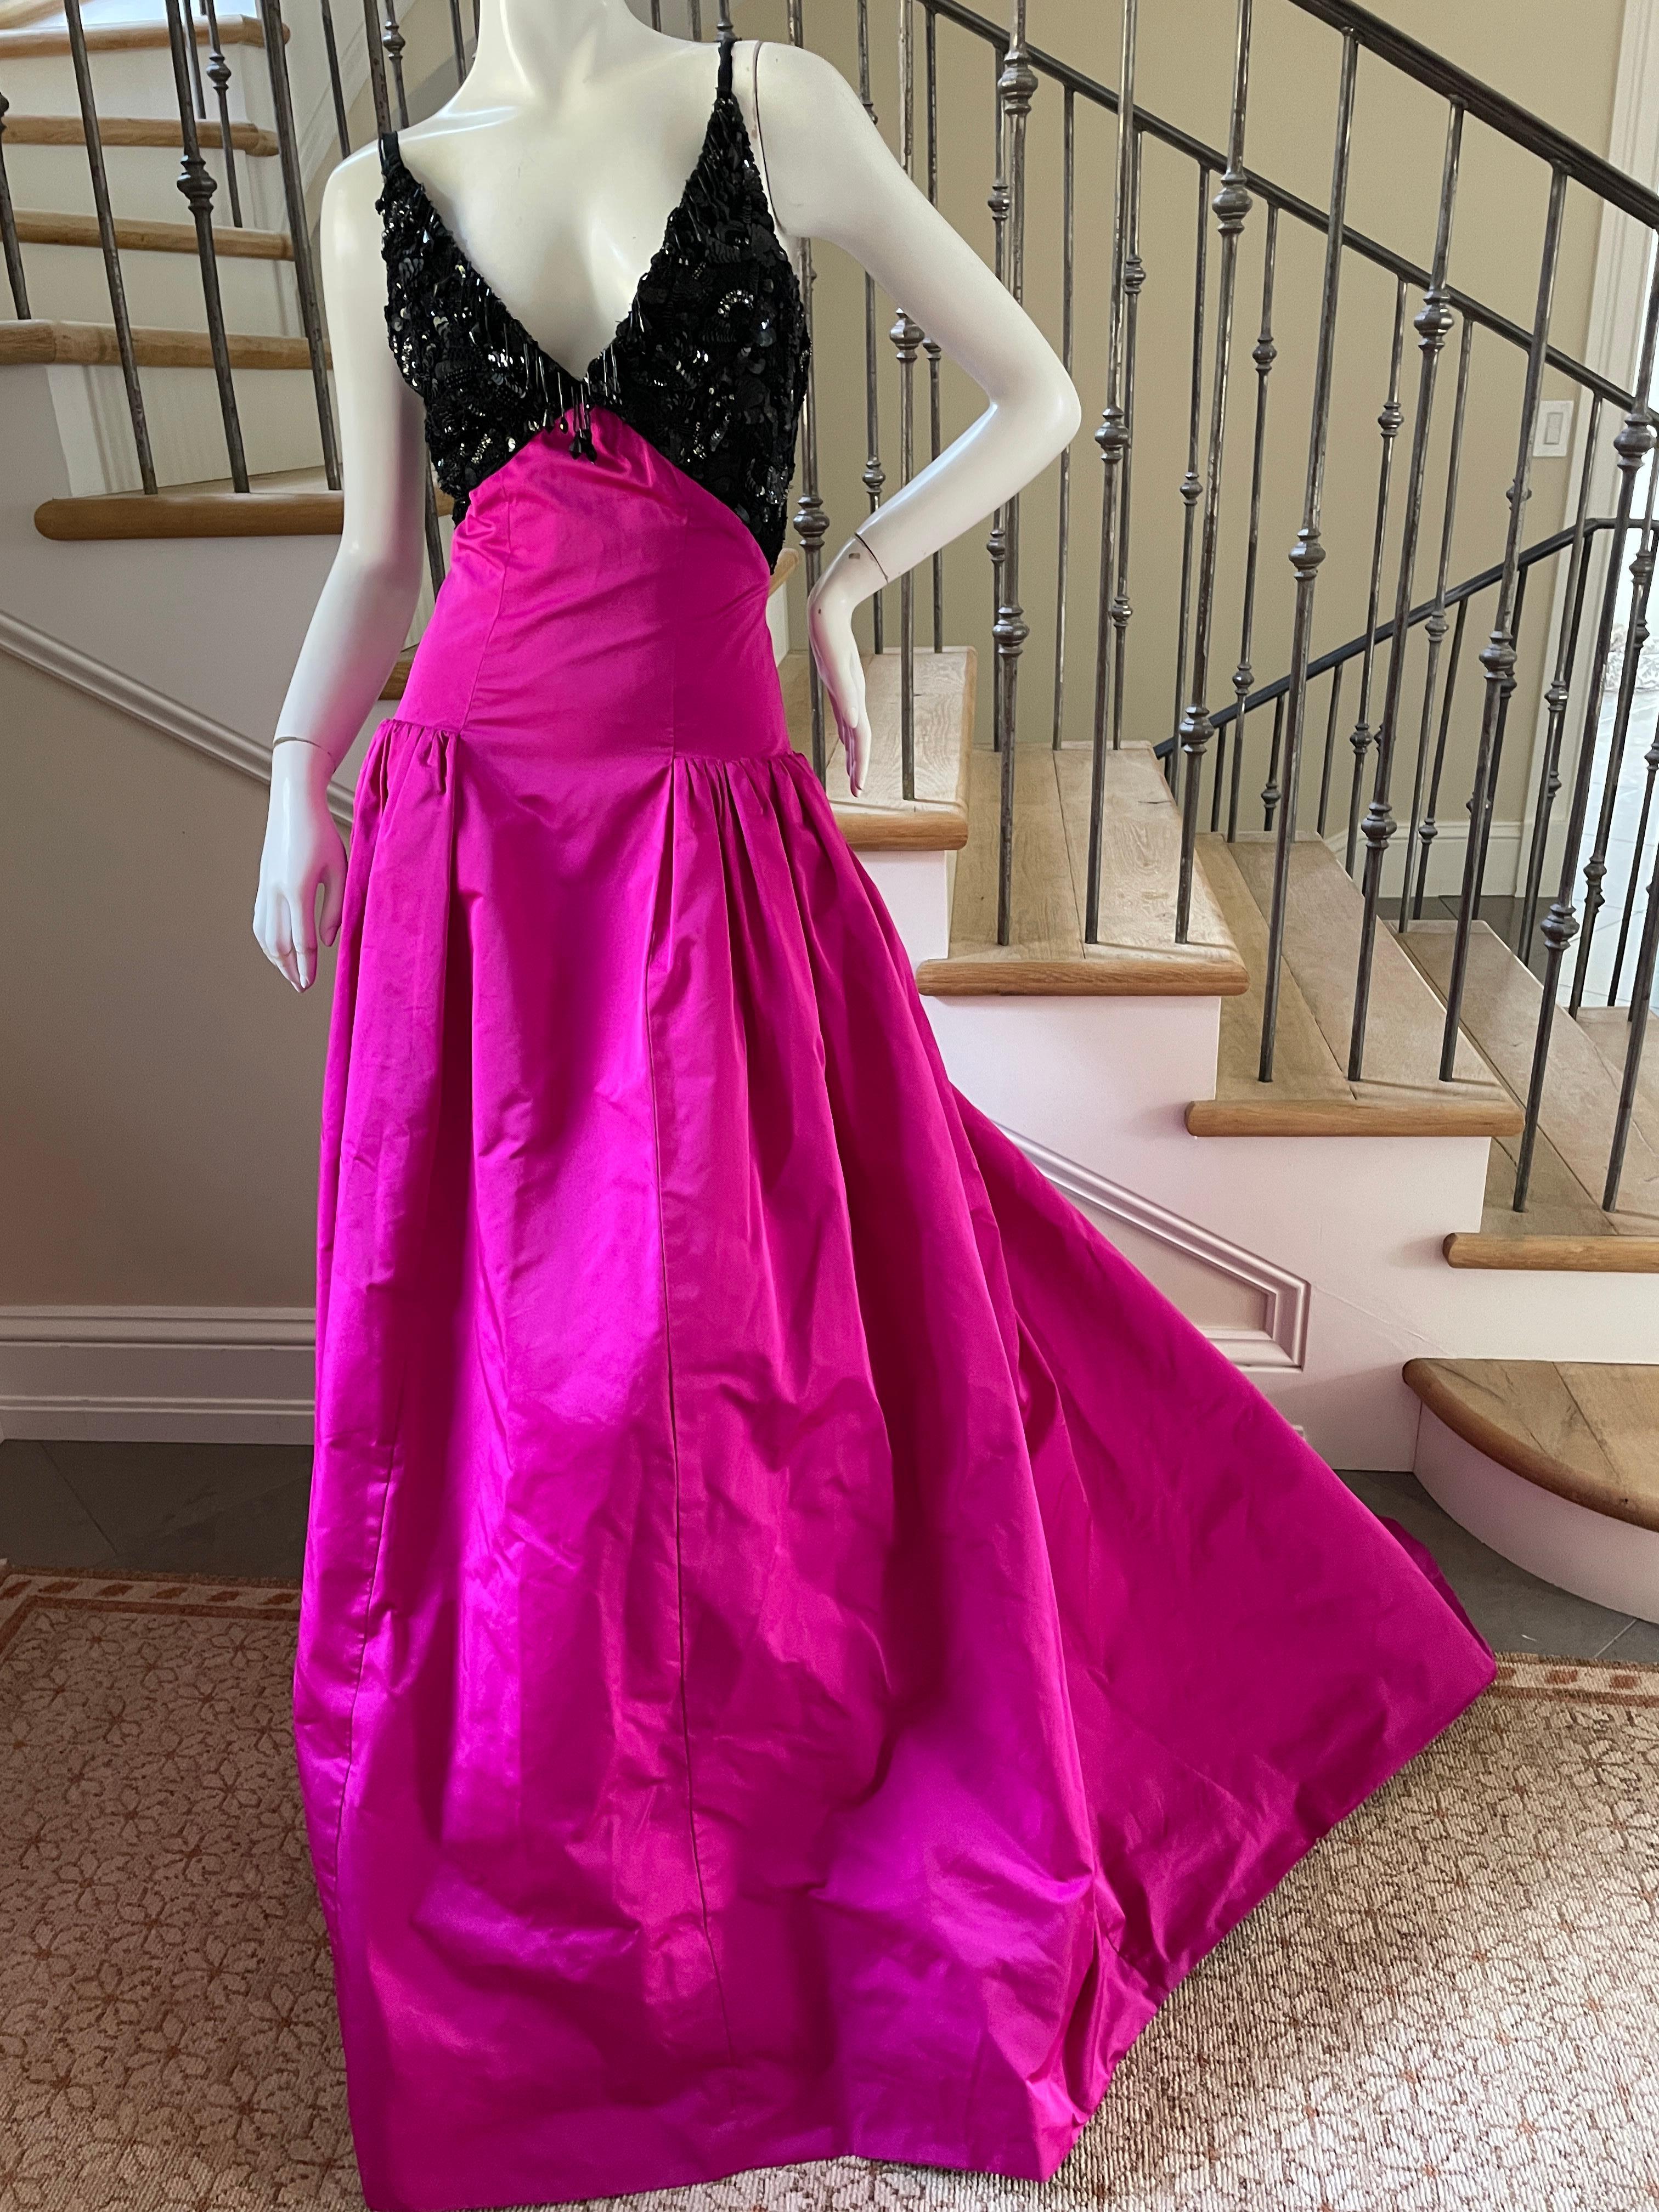 Oscar de la Renta Beaded Evening Dress with Fuschia Taffeta Ball Skirt and Train
Stunning. Please use the zoom feature to see all the remarkable details.
I believe this is a pre production sample, it has the sample tag underneath the Oscar de la